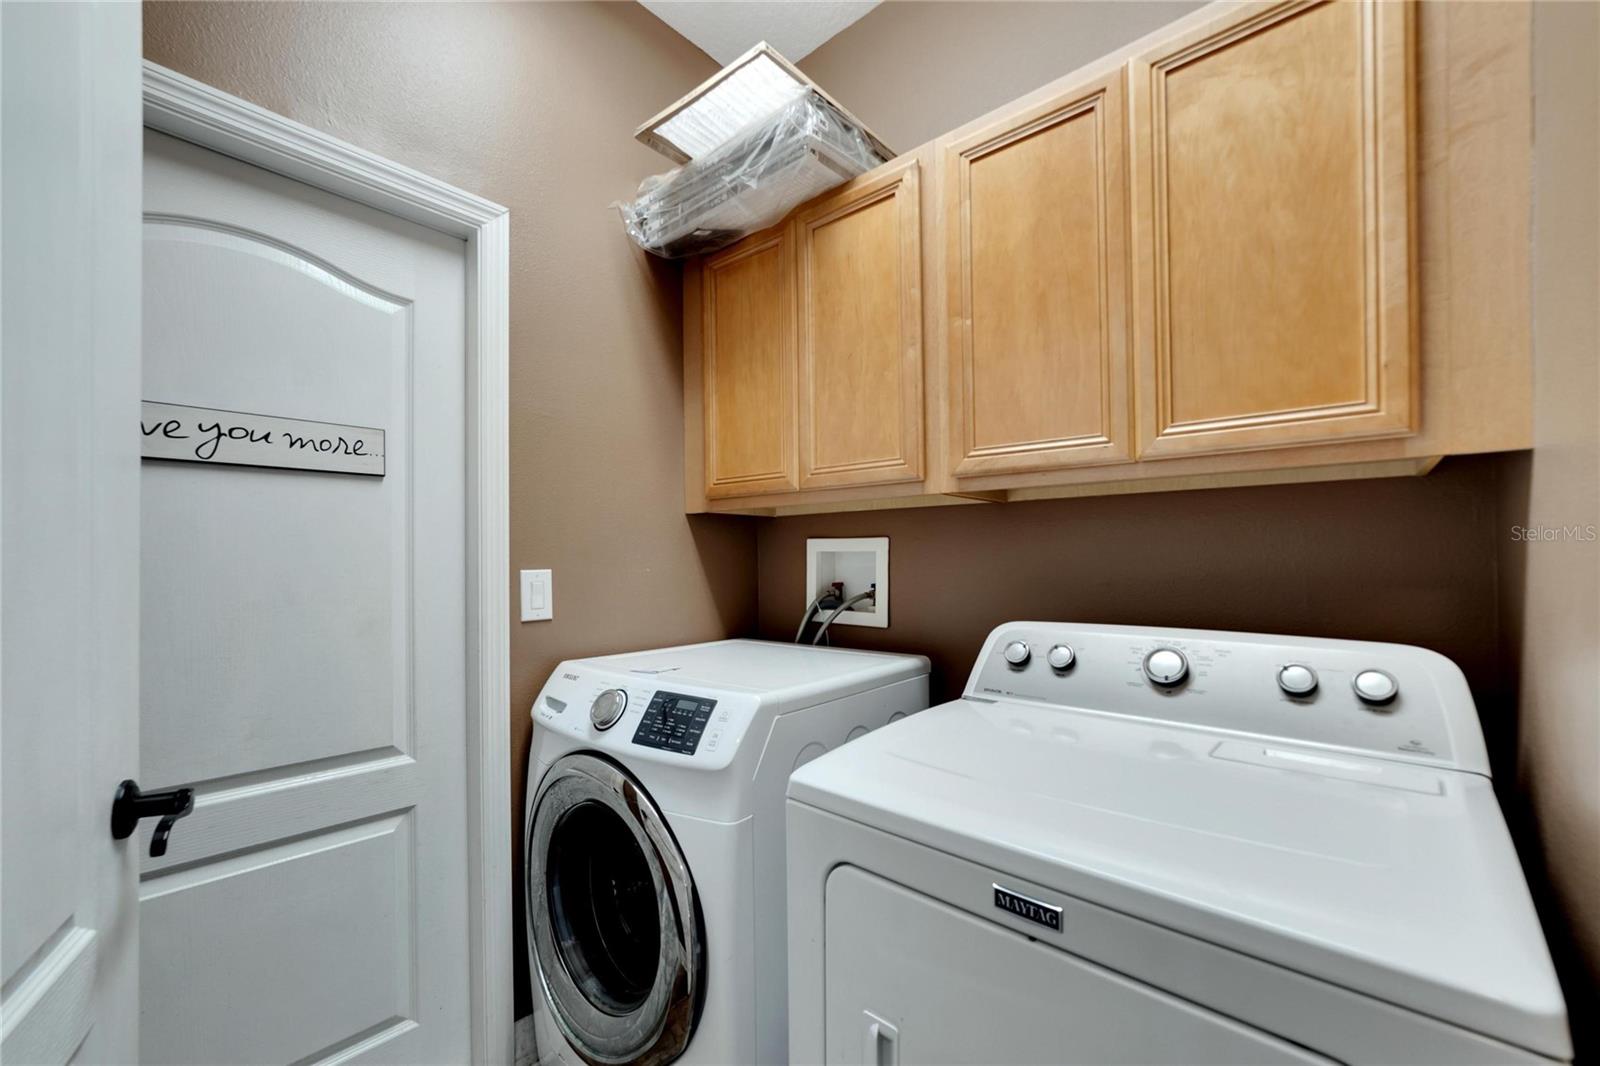 Laundry room with included appliances